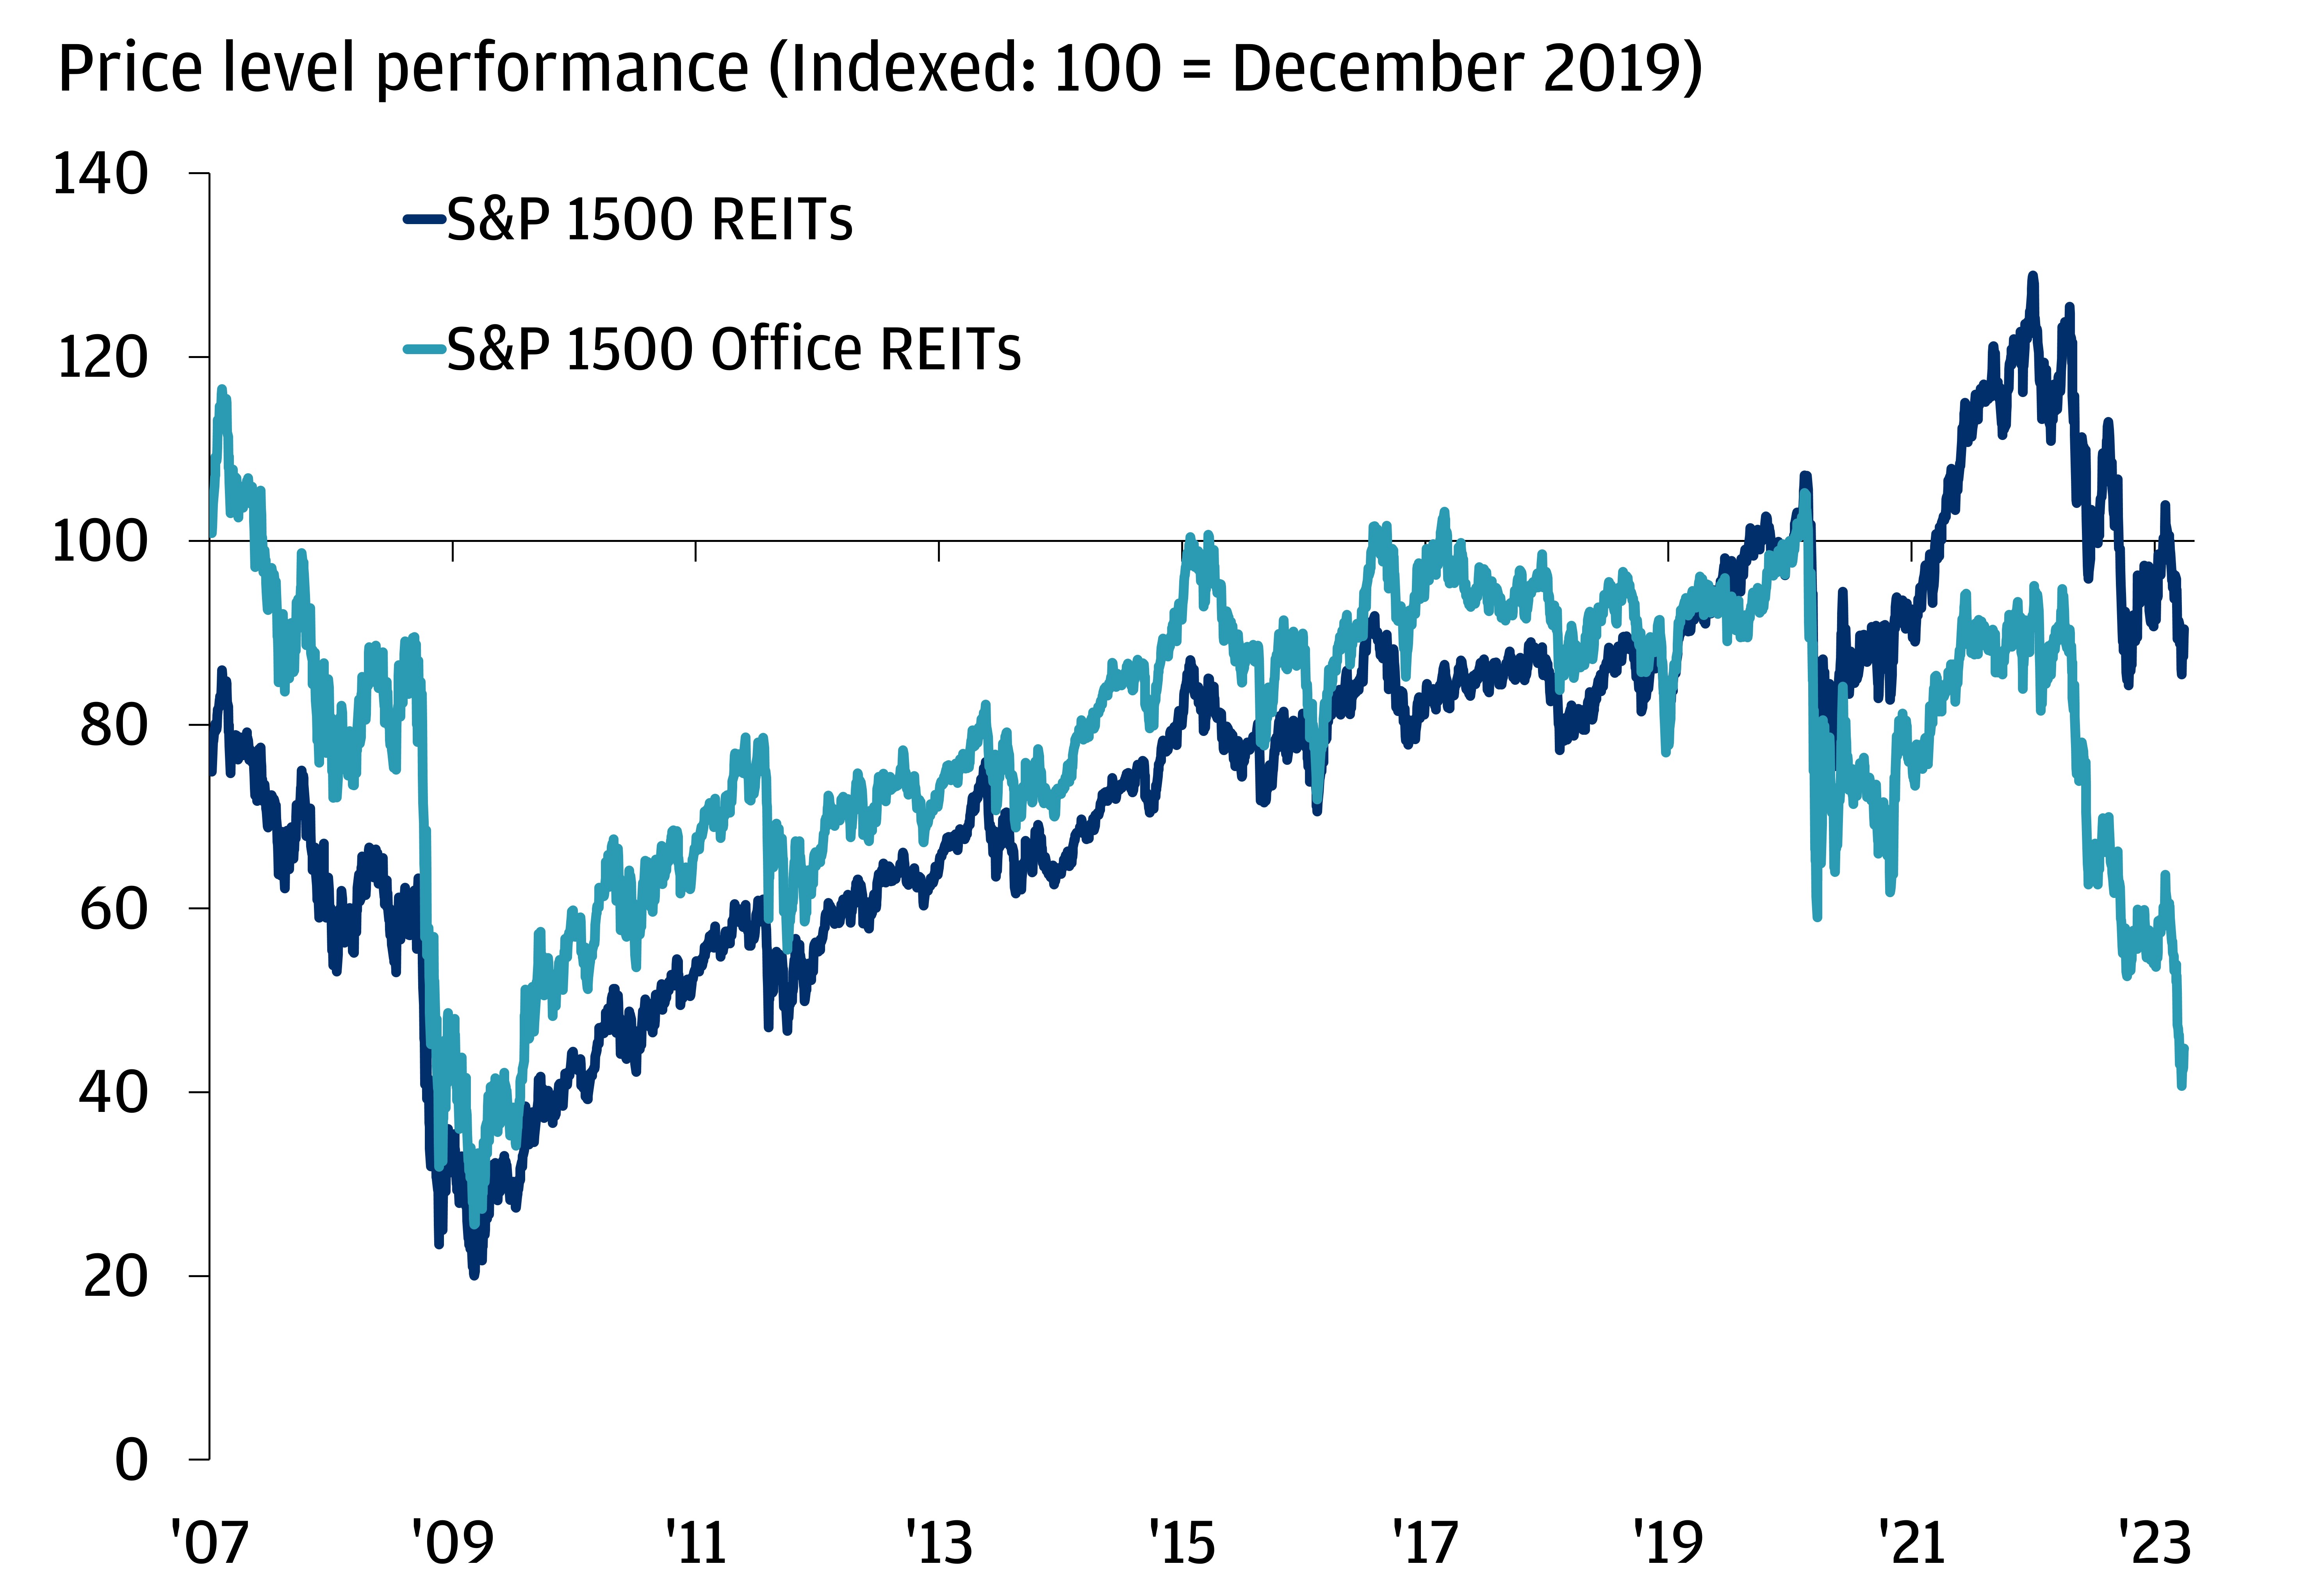 The chart shows the price level performance for REITs (represented by the S&P 1500 REITs Index) versus Office REITs (represented by the S&P 1500 Office REITs Index).